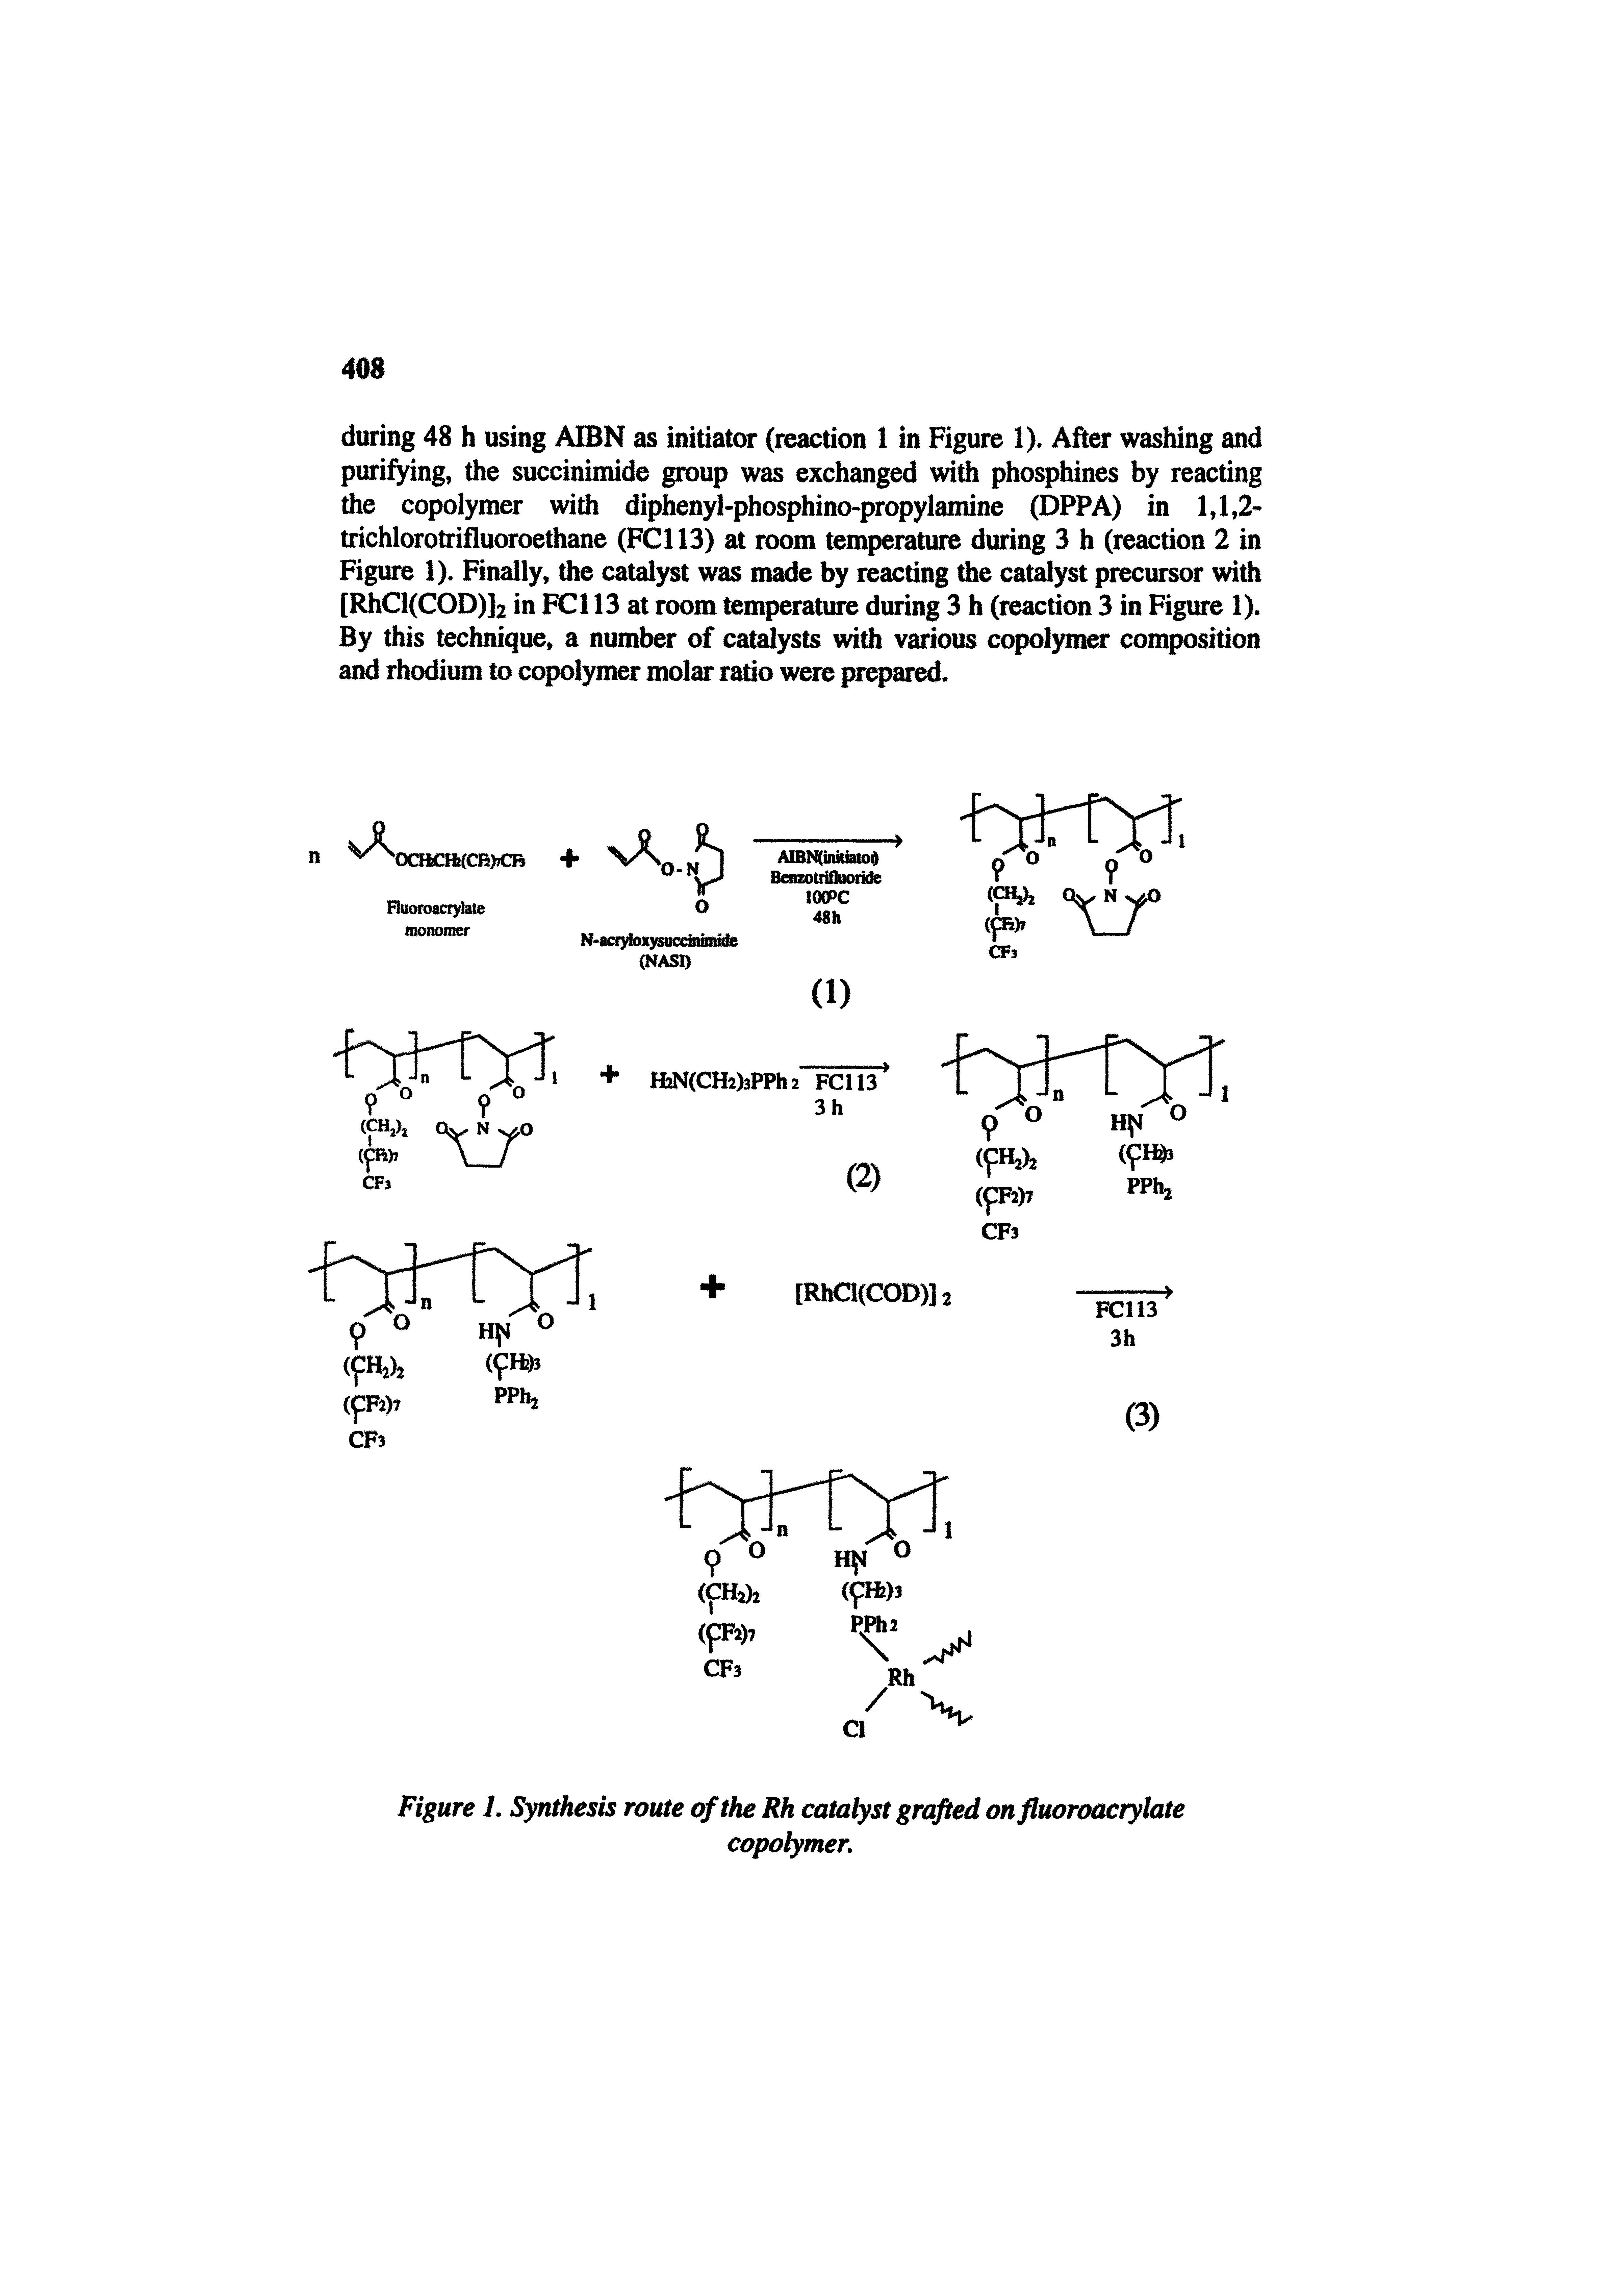 Figure 1. Synthesis route of the Rh catalyst grafted onfluoroacrylate...